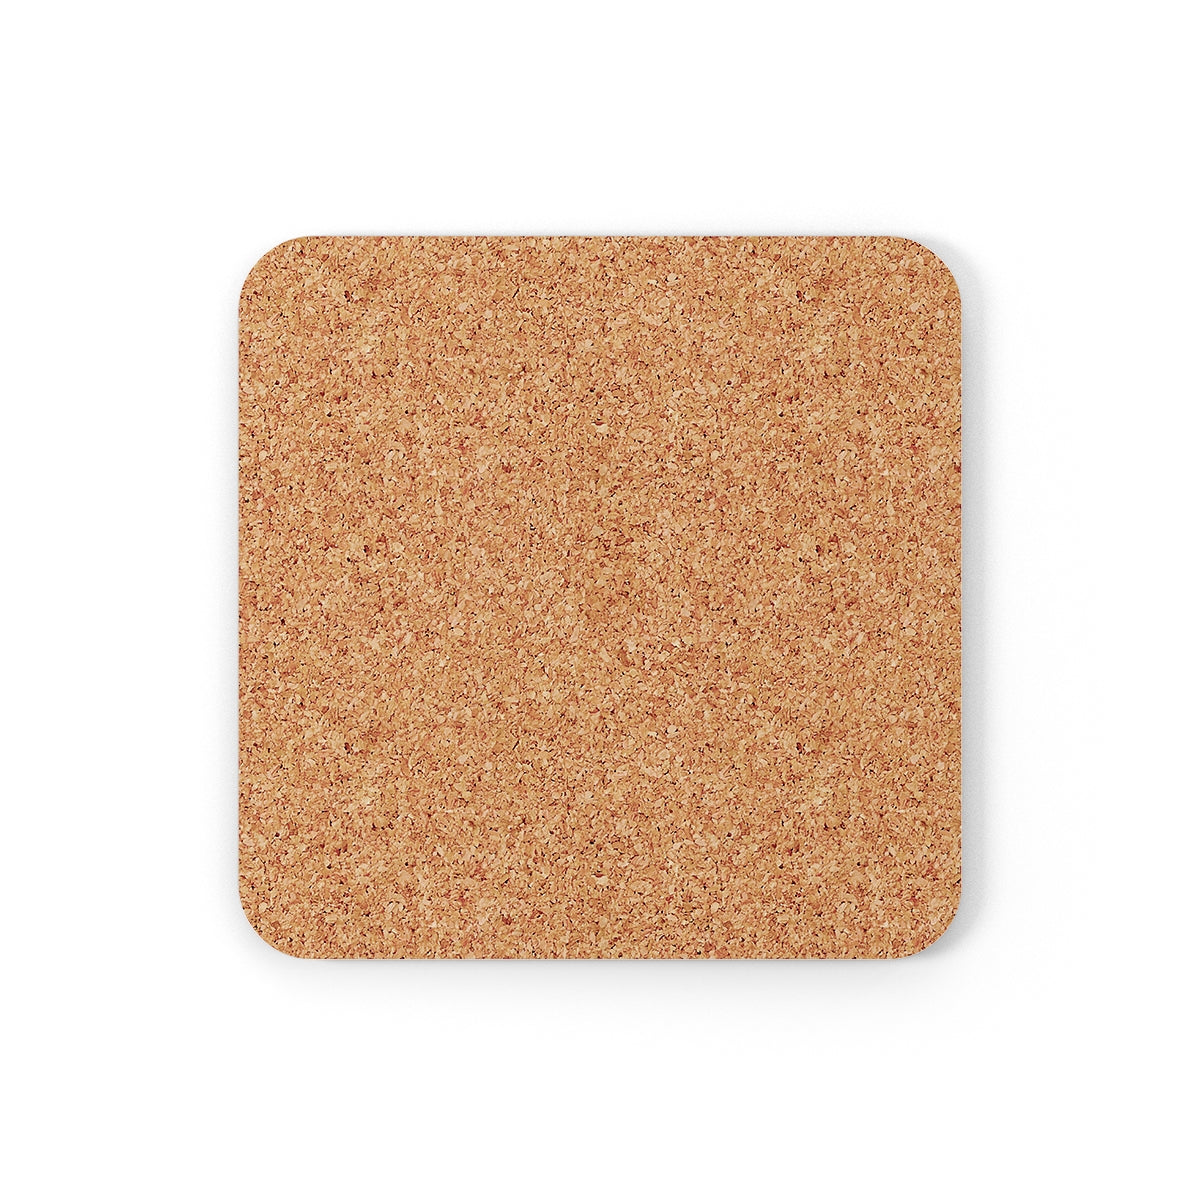 You Need a REFILL Corkwood Coaster Set of 4